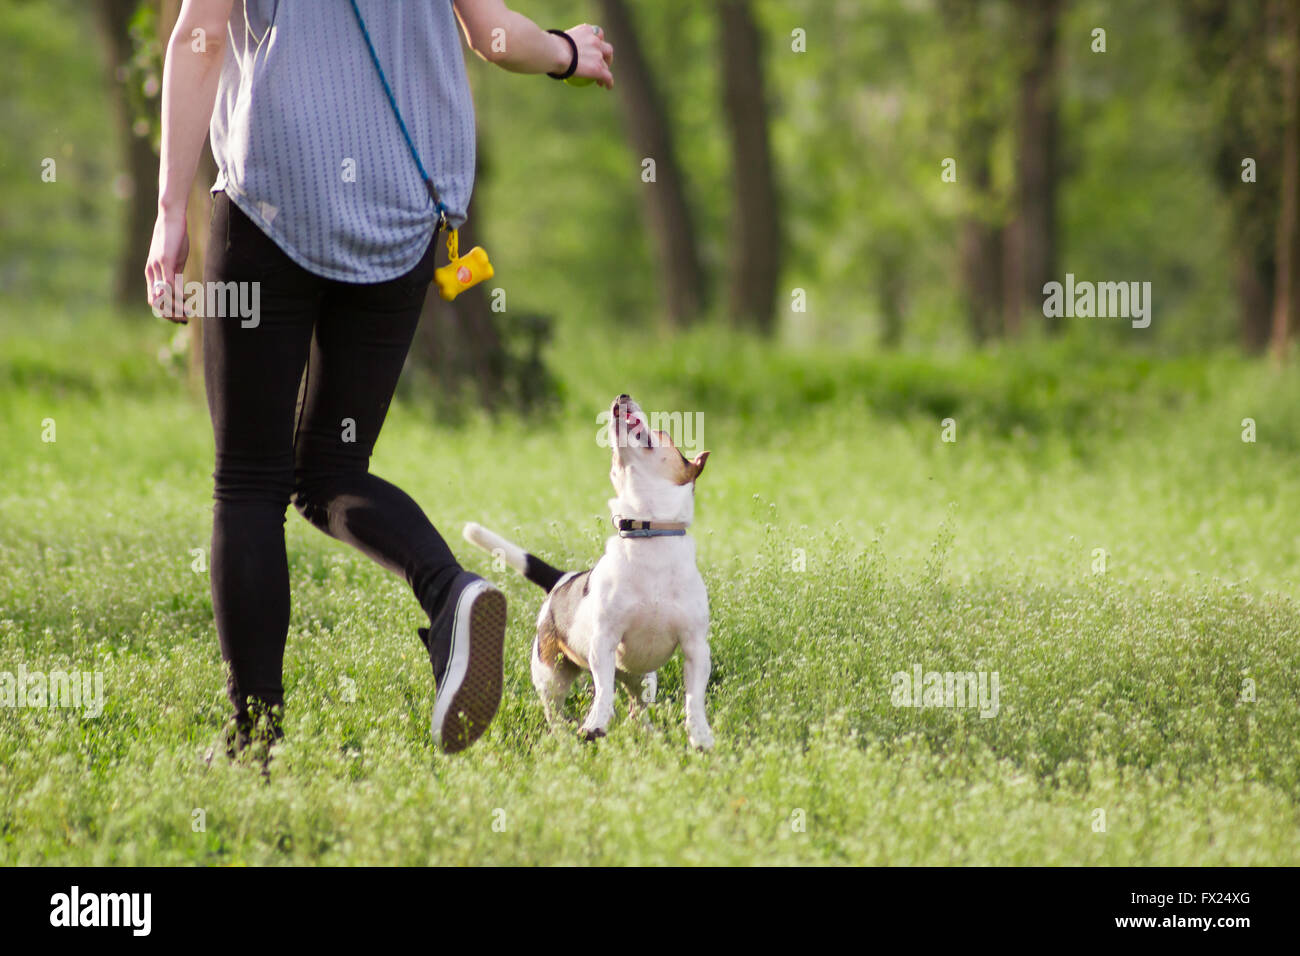 Young woman walking with a dog playing training, jumping dog Stock Photo